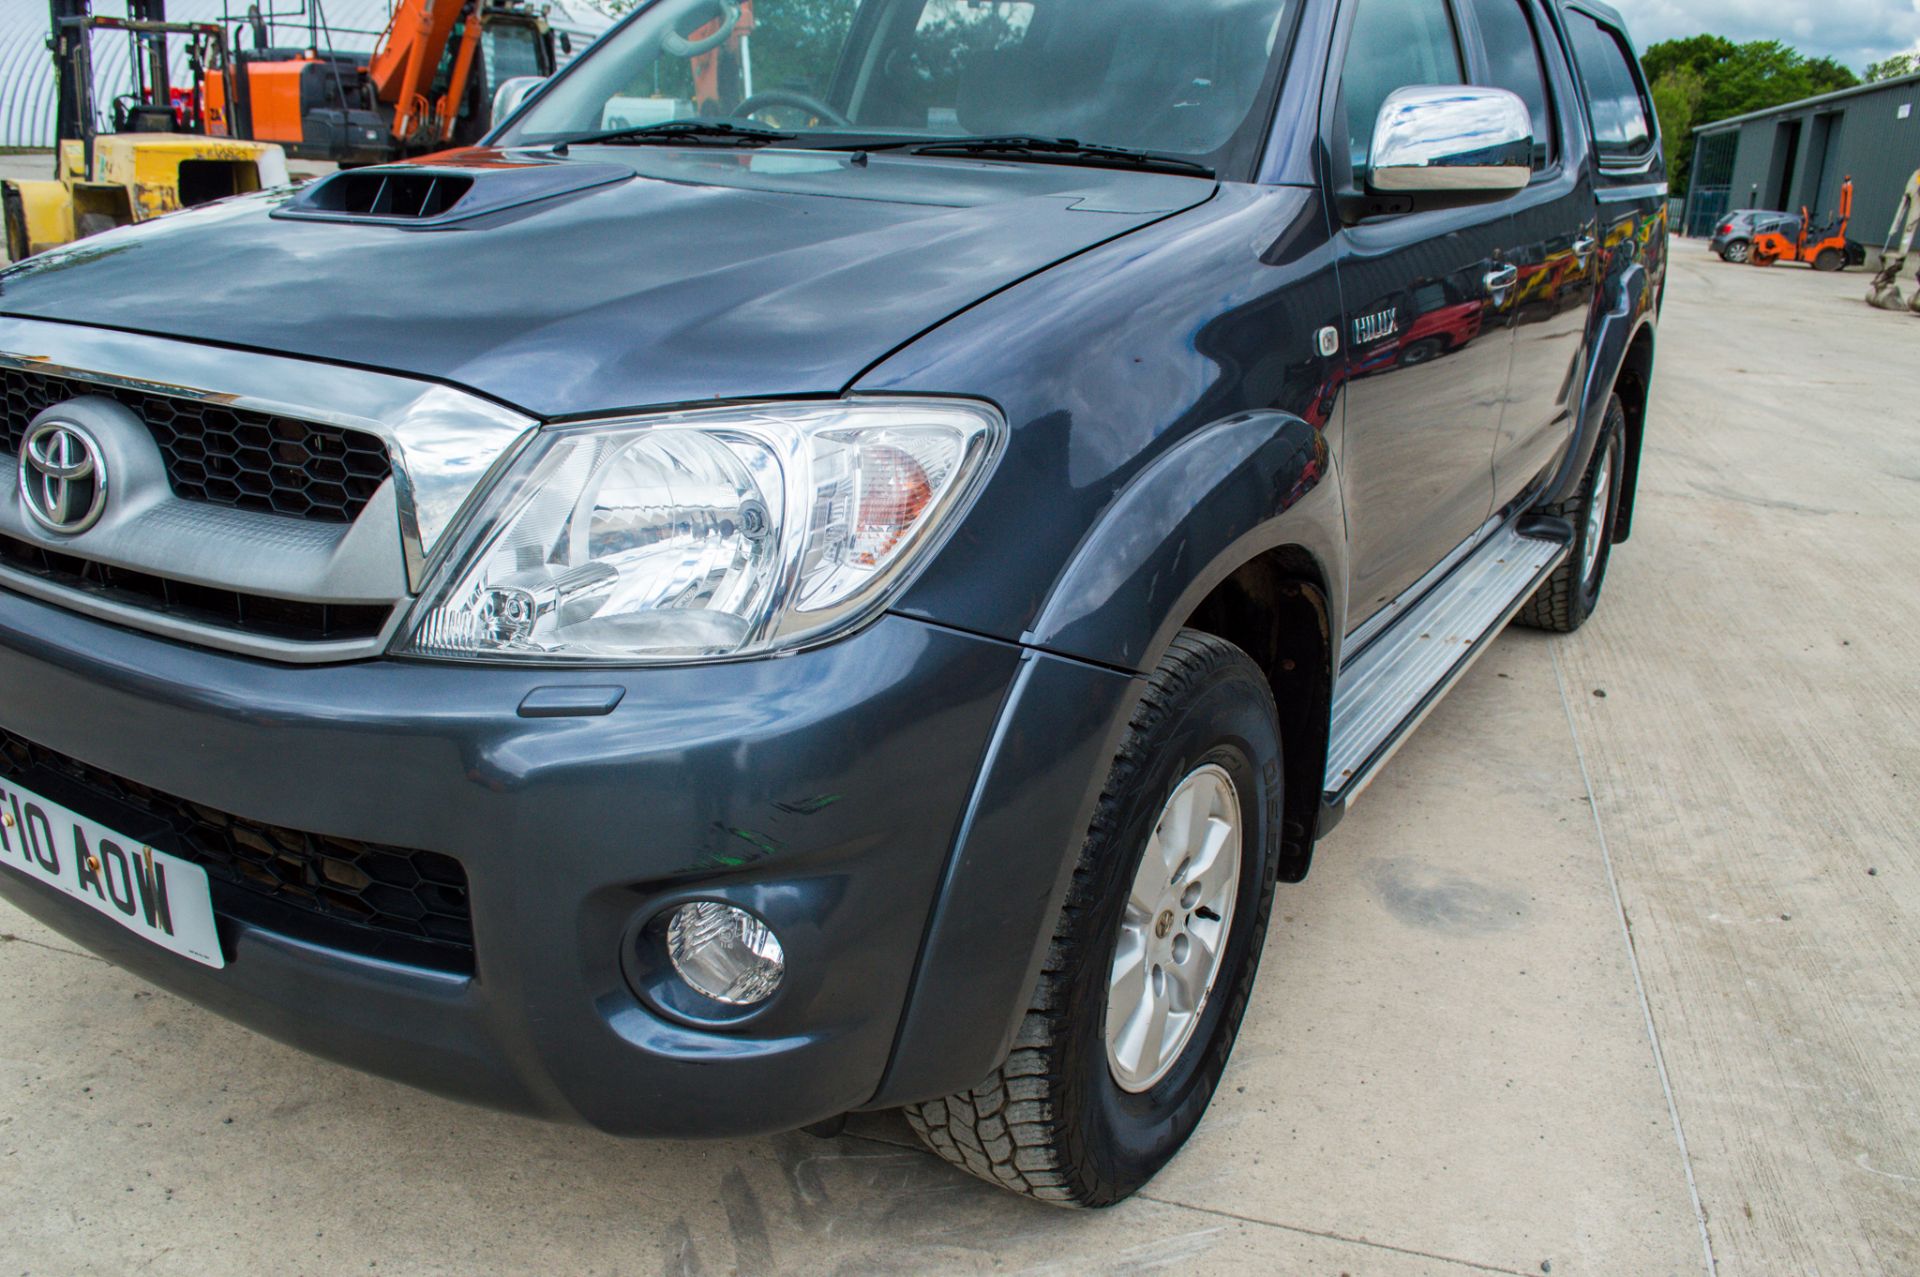 Toyota Hilux 2.5 D-4D 144 HL3 4wd manual double cab pick up Reg No: ST10 AOW Date of Registration: - Image 10 of 25